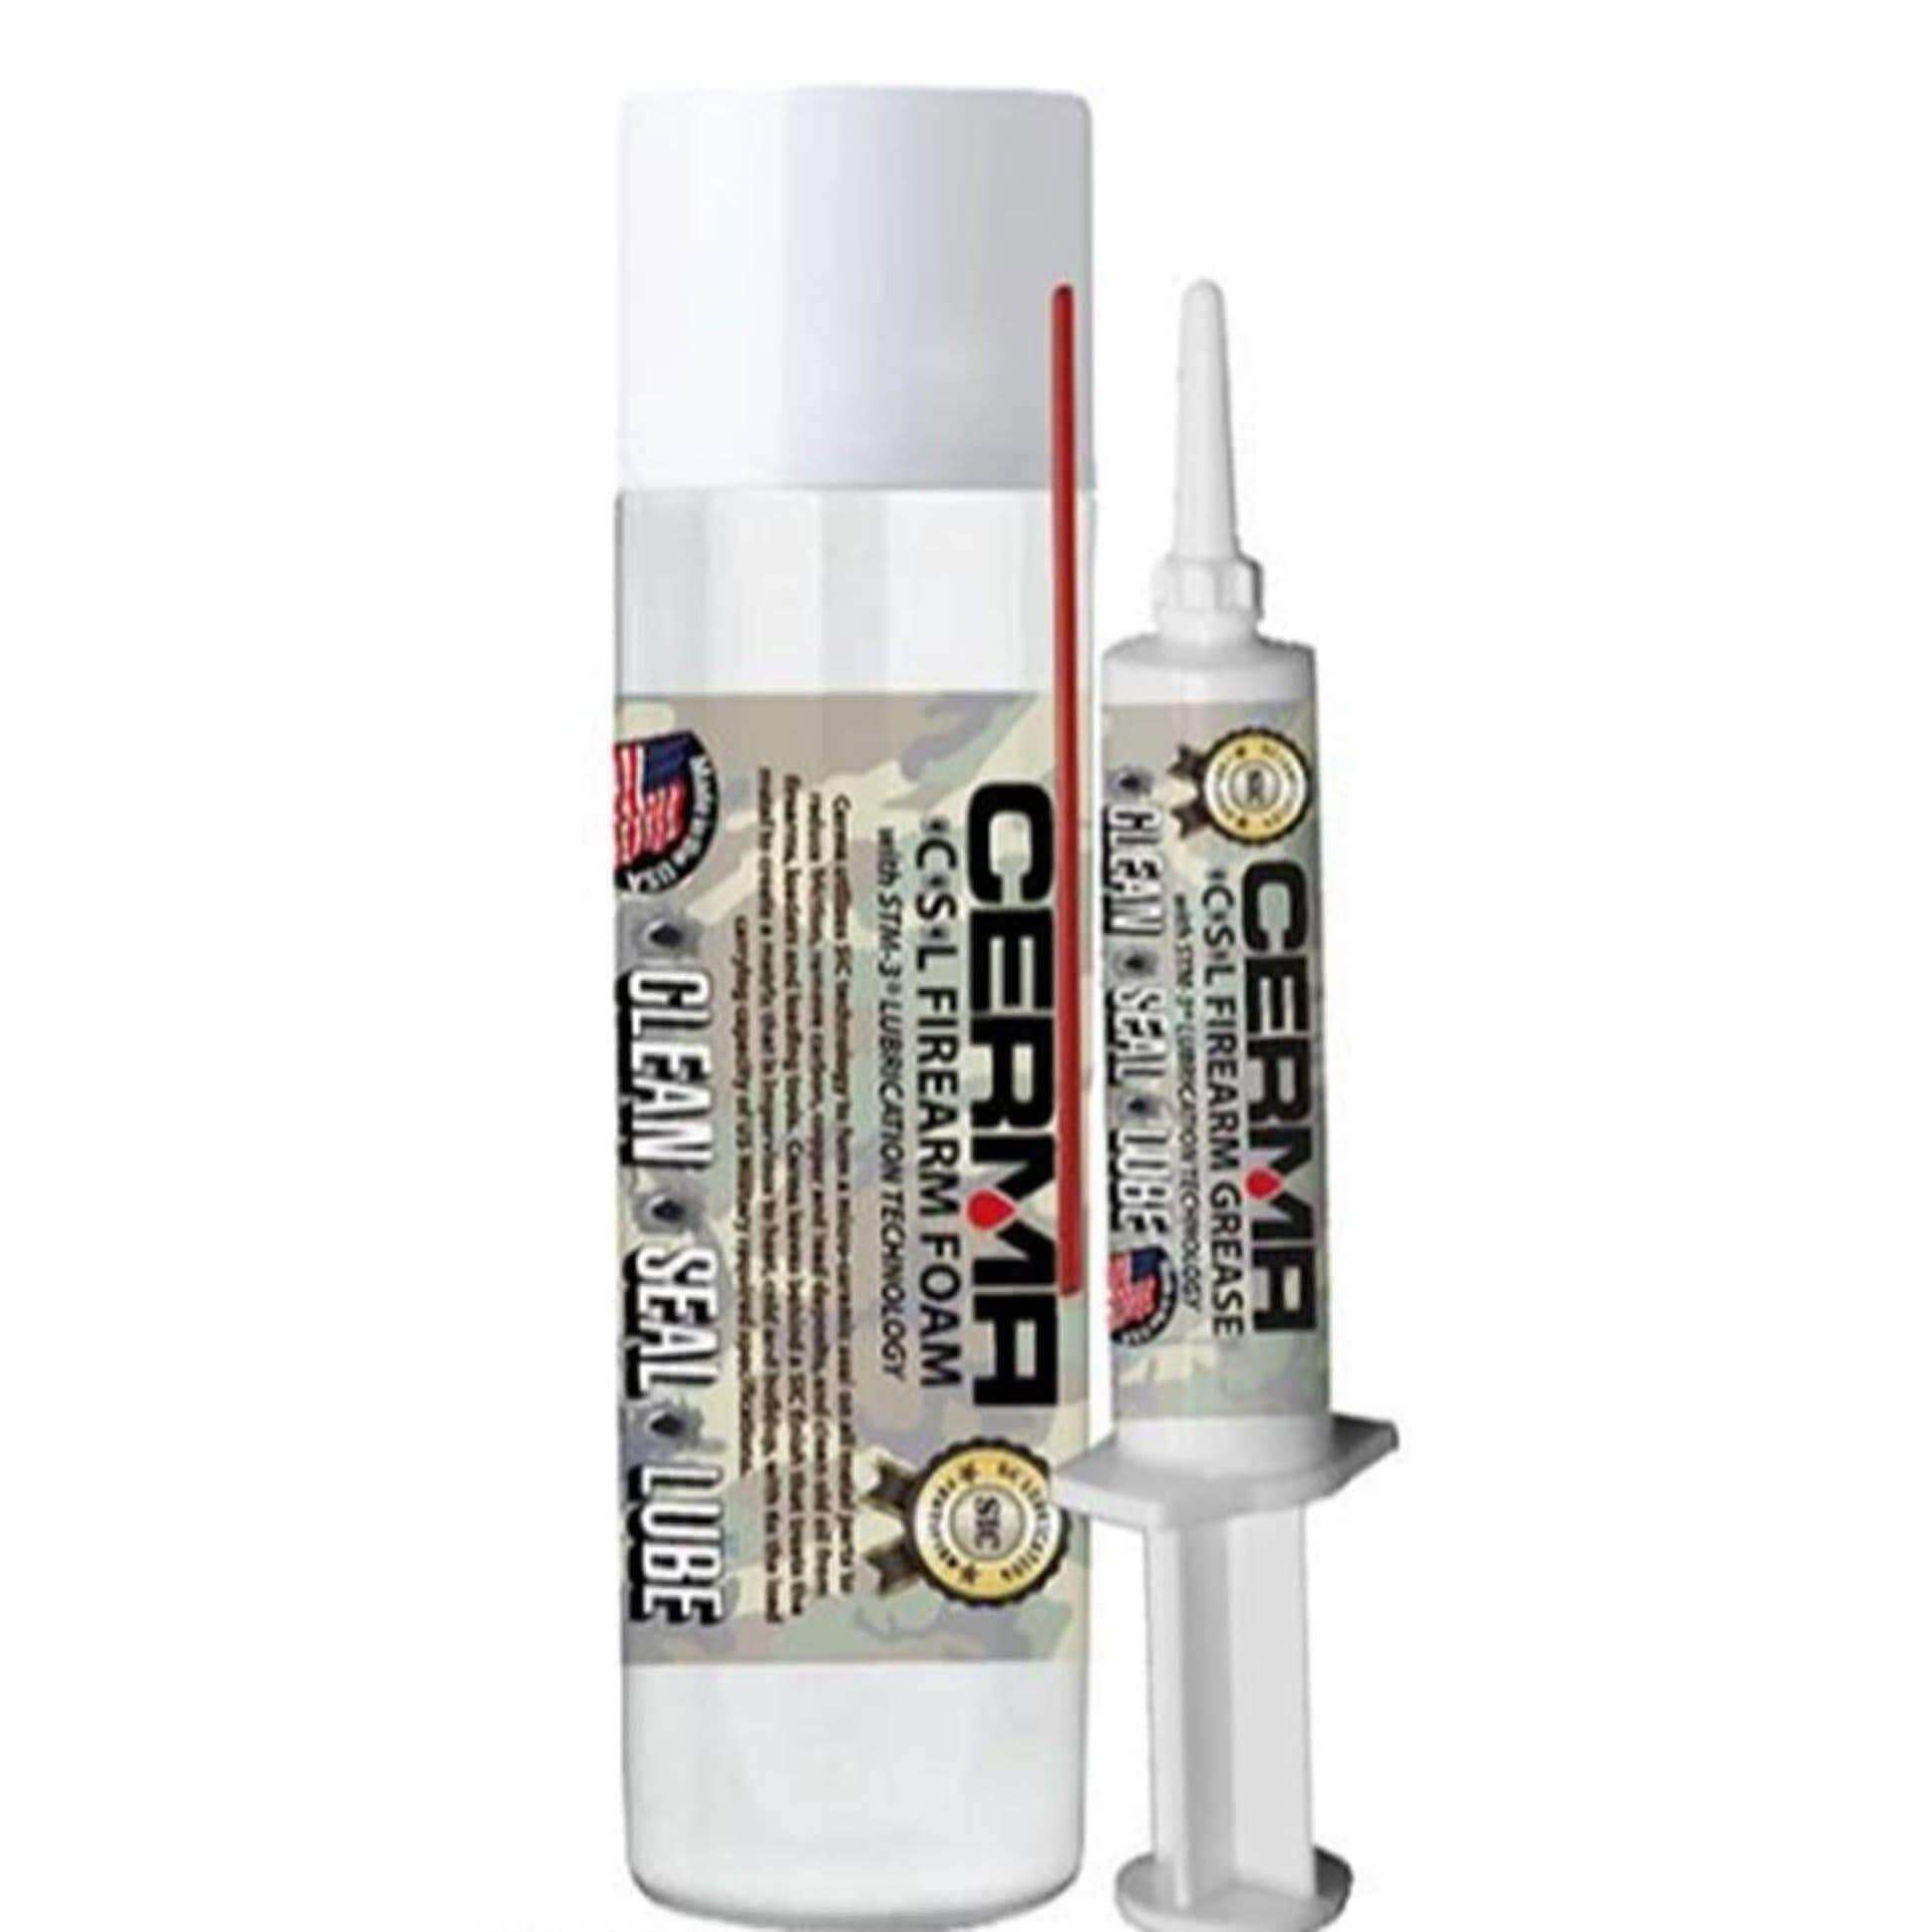 Cerma Ceramic C•S•L Firearm Foam and Grease Treatment at $68.95 only from cermatreatment.com